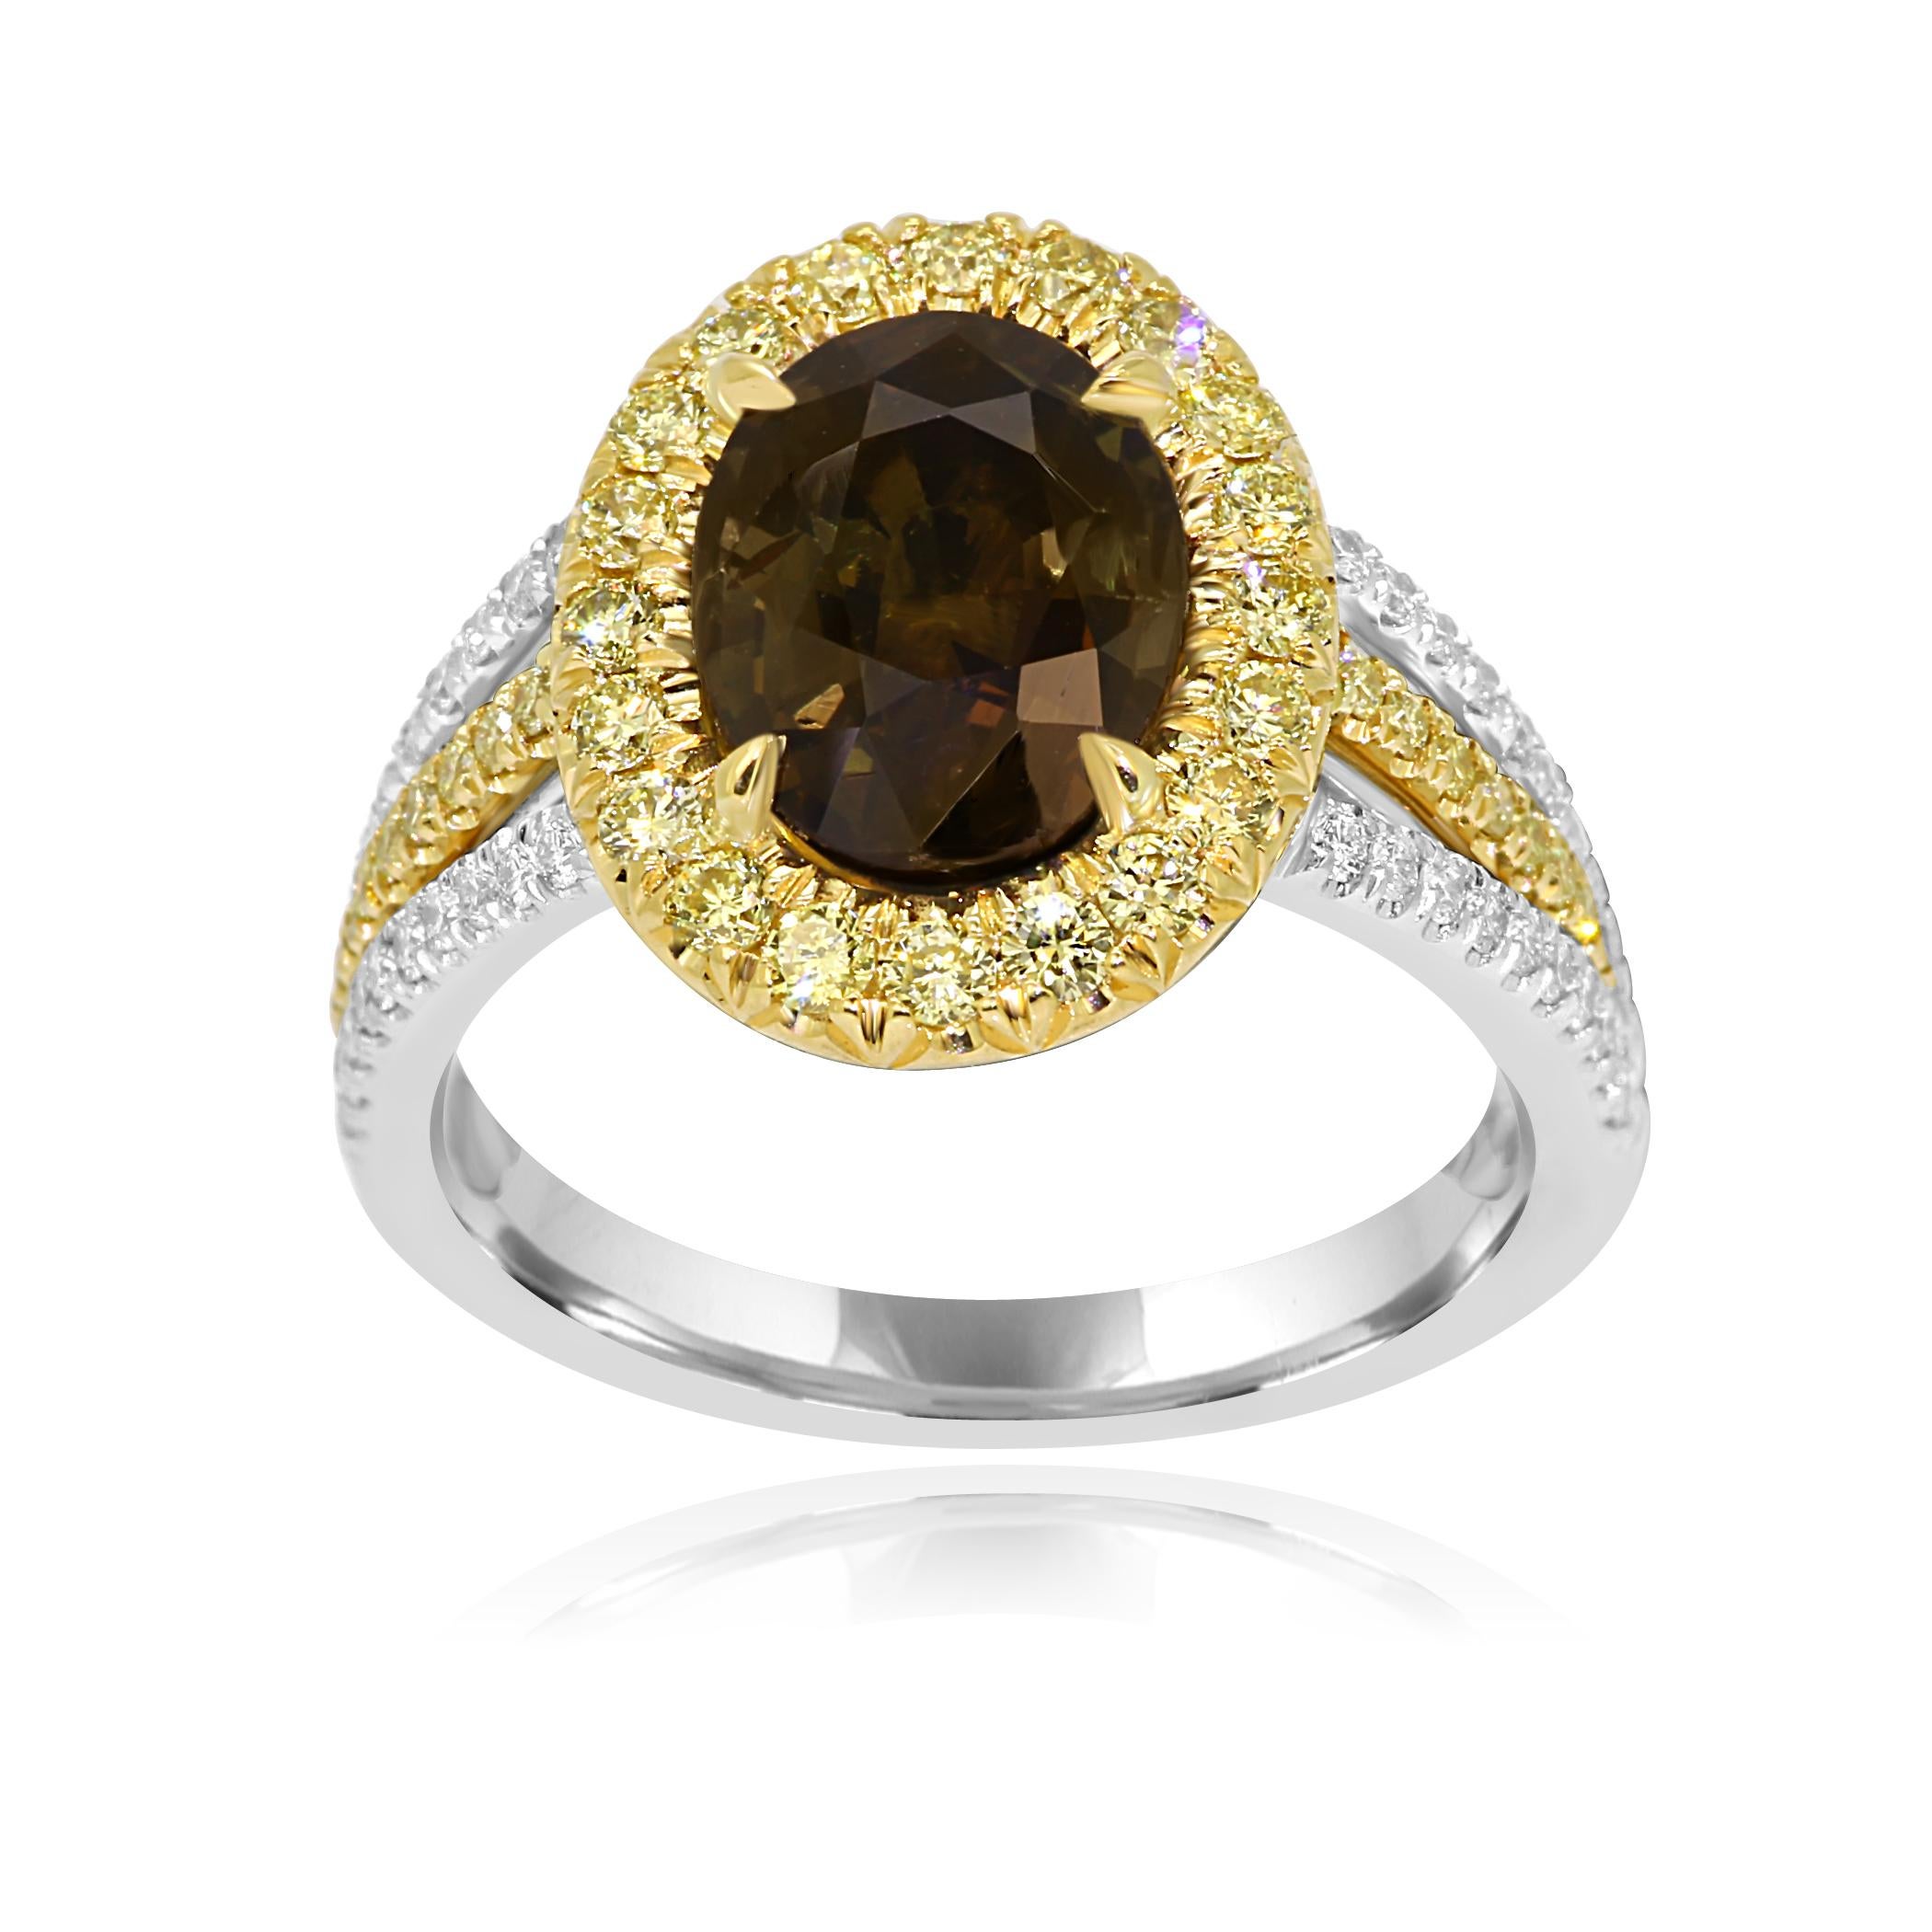 Gorgeous 2.76 Carat Alexandrite Oval Encircled in a Single Halo of Natural Fancy Yellow Diamond Round 0.48 Carat with White Diamond Rounds 0.25 Carat in a Stunning Three Prong Shank 18K White and Yellow Gold Ring.

Style available in different price